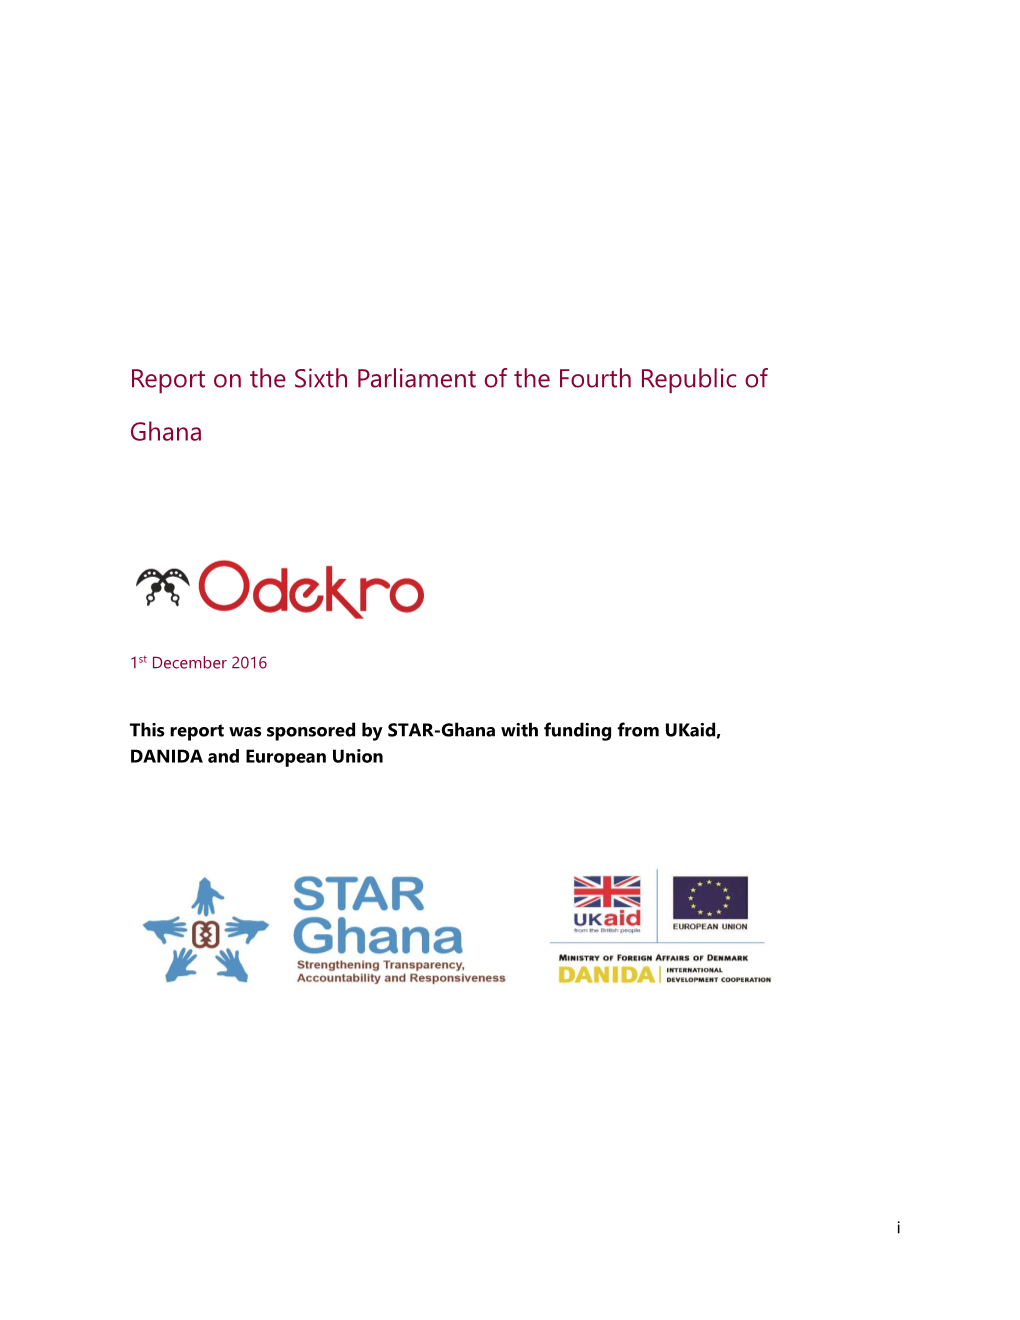 Report on the Sixth Parliament of the Fourth Republic of Ghana